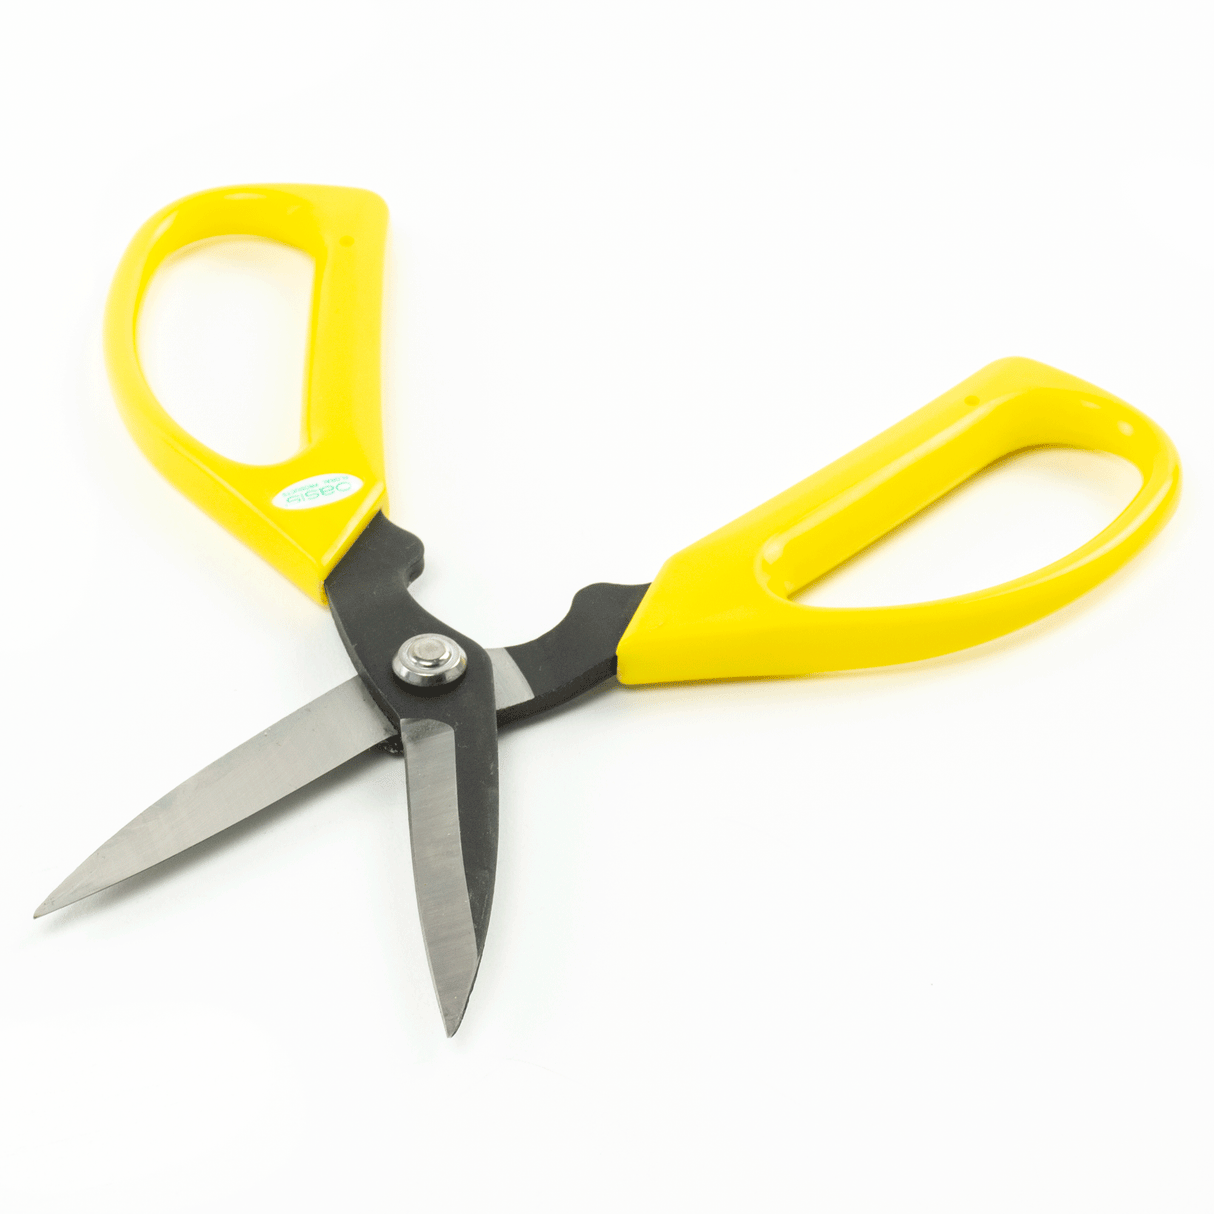 This image shows a pair of carbon blade scissors